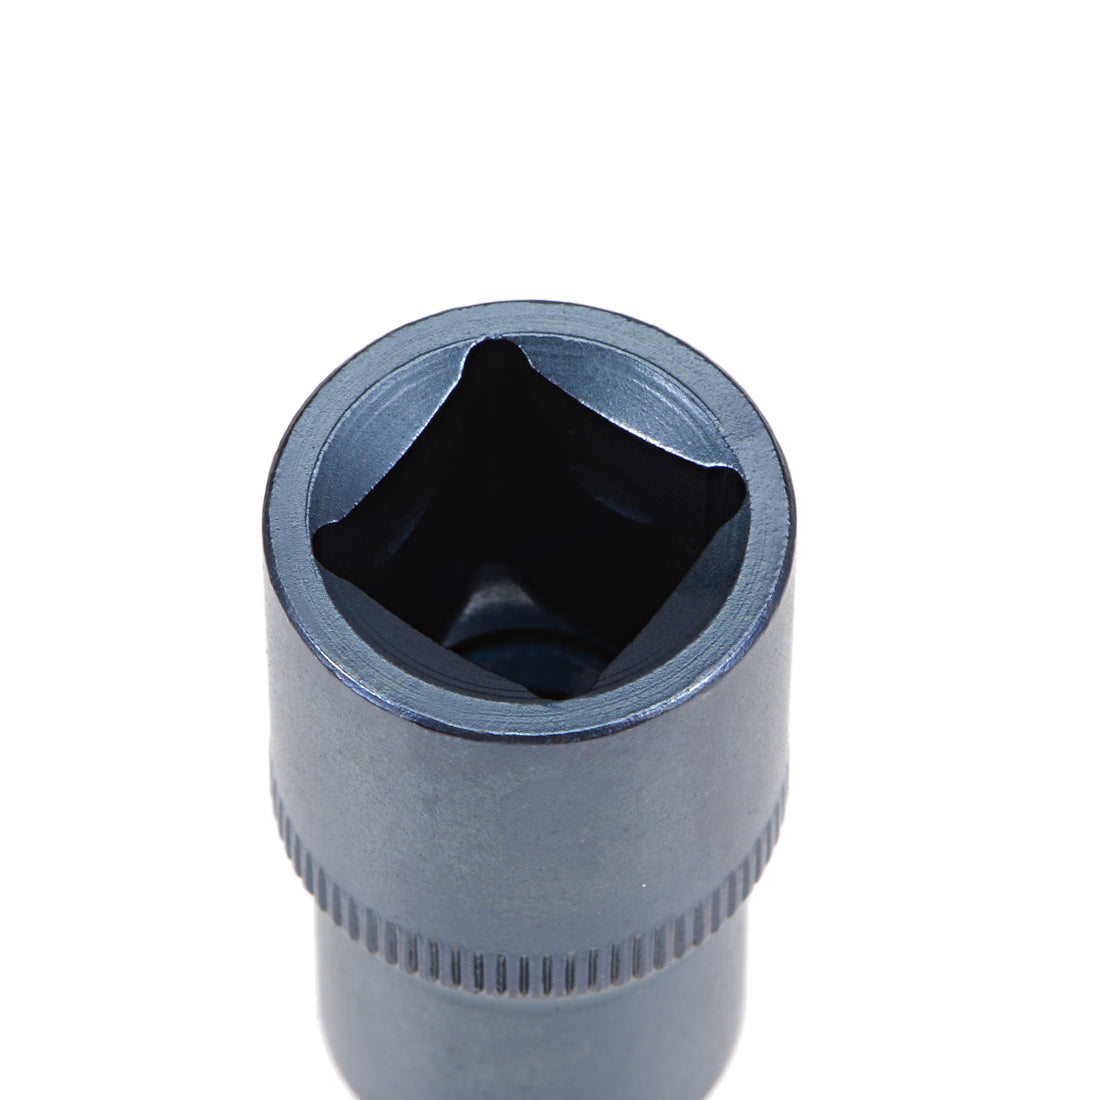 uxcell Uxcell 1/2" Drive x T55 Torx Bit Socket, S2 Steel Bits, CR-V Sockets Metric 2" Length Blue (For Hand Use Only)